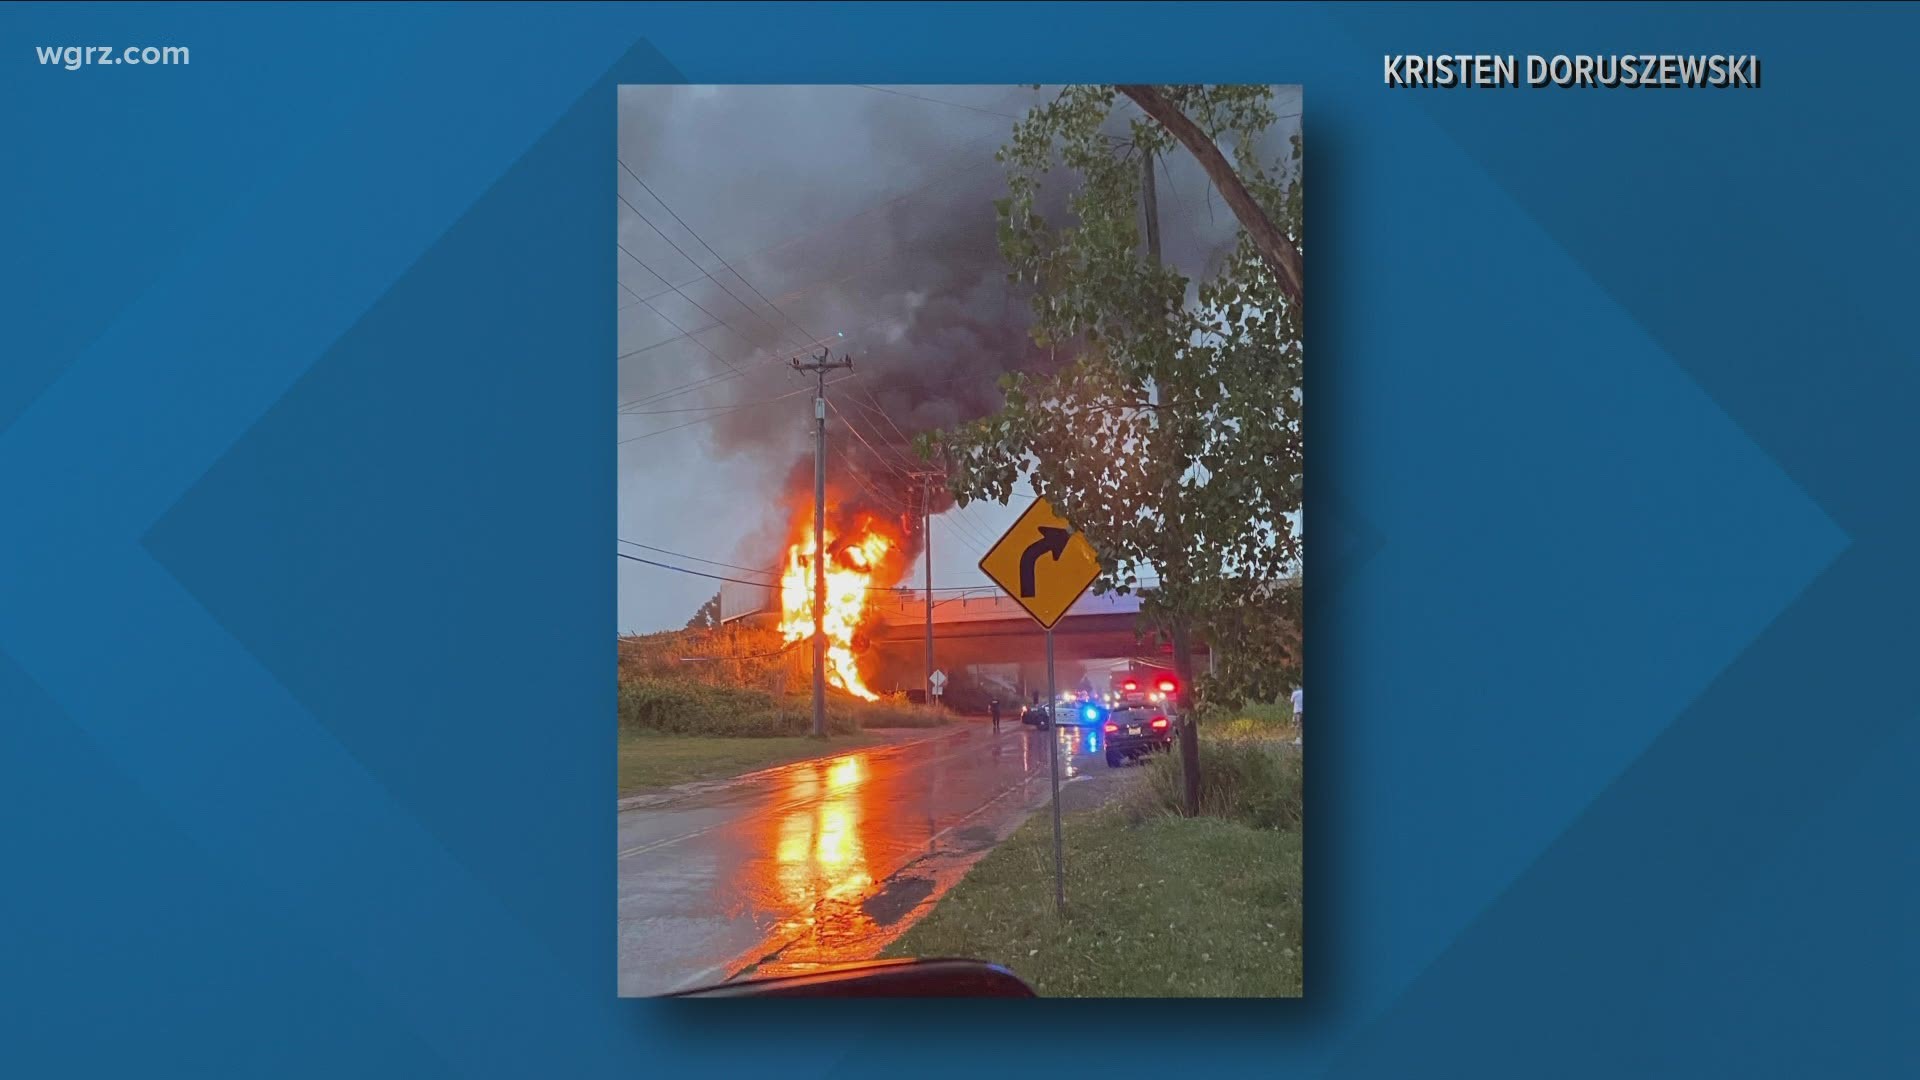 A burning tractor trailer stopped traffic and grabbed attention on the NYS Thruway in West Seneca, Wednesday evening.